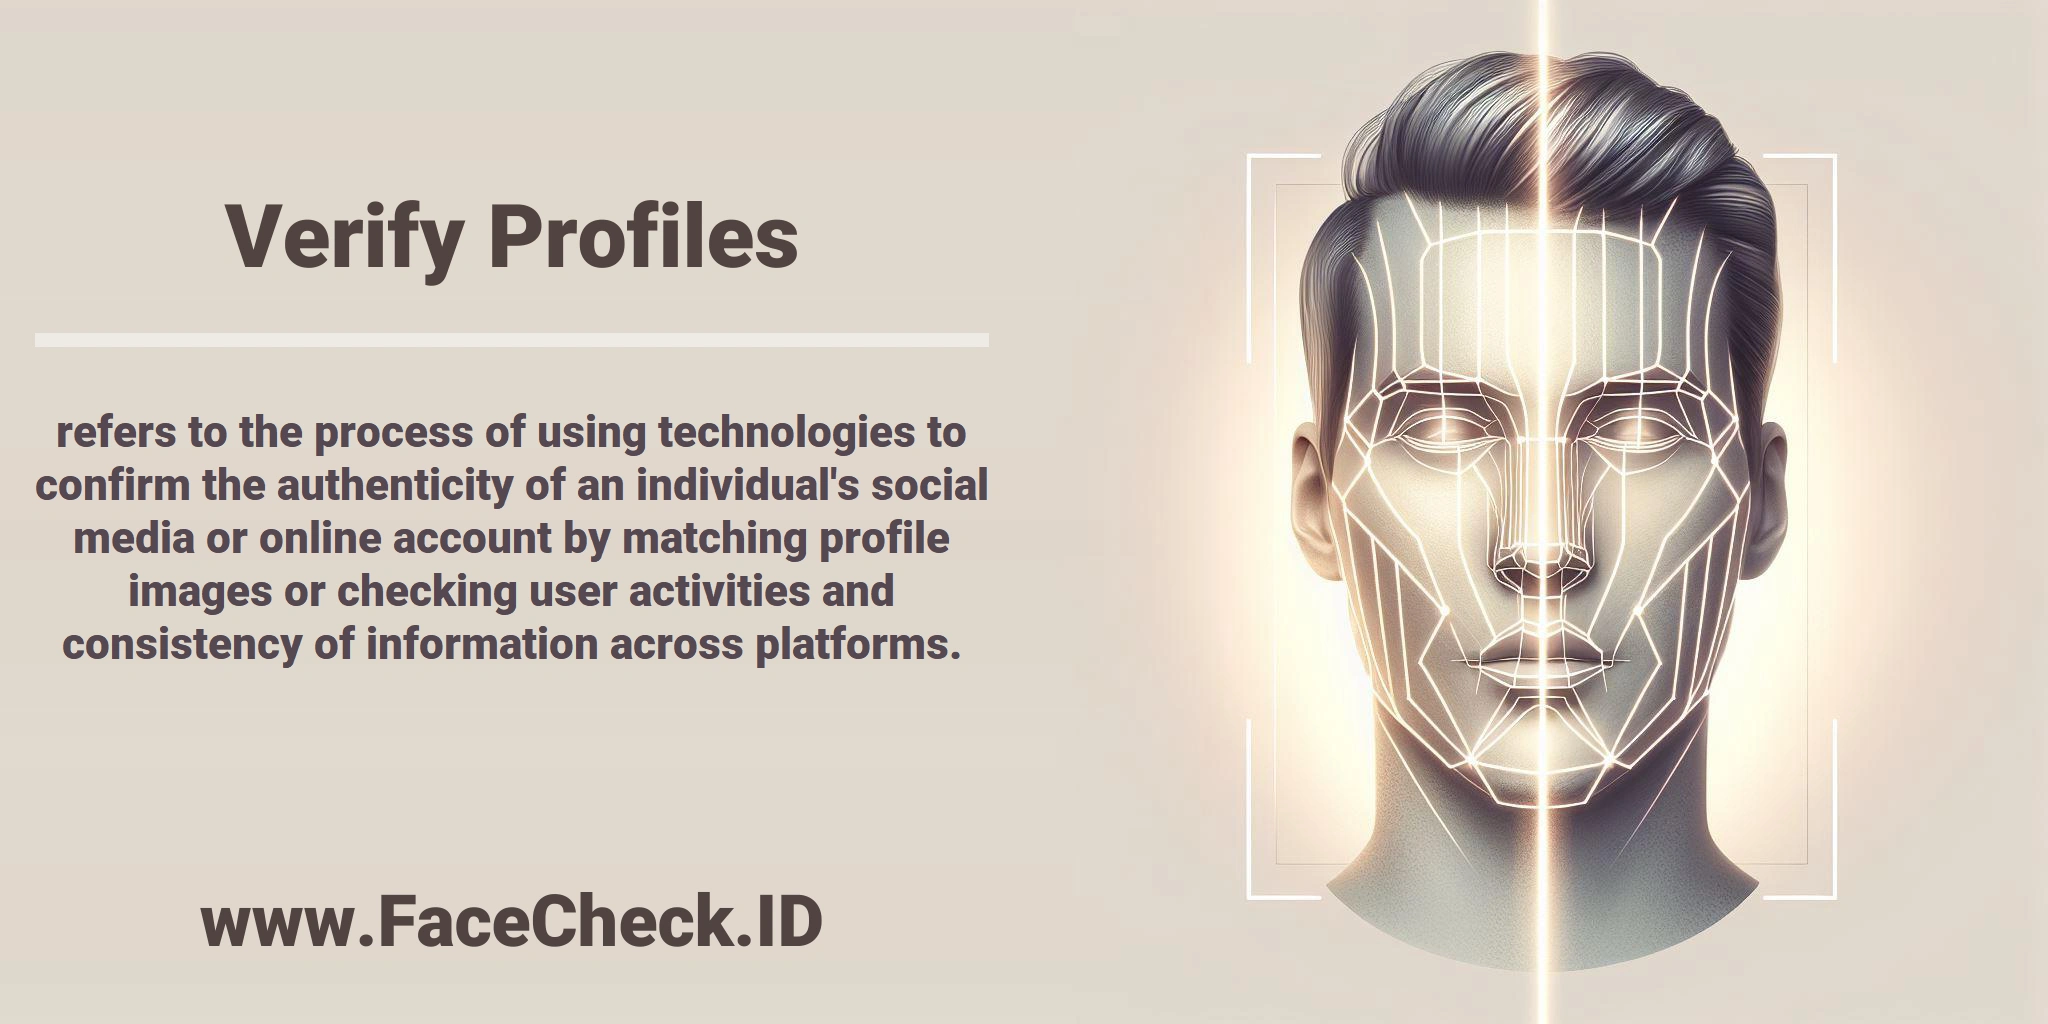 <b>Verify Profiles</b> refers to the process of using technologies to confirm the authenticity of an individual's social media or online account by matching profile images or checking user activities and consistency of information across platforms.